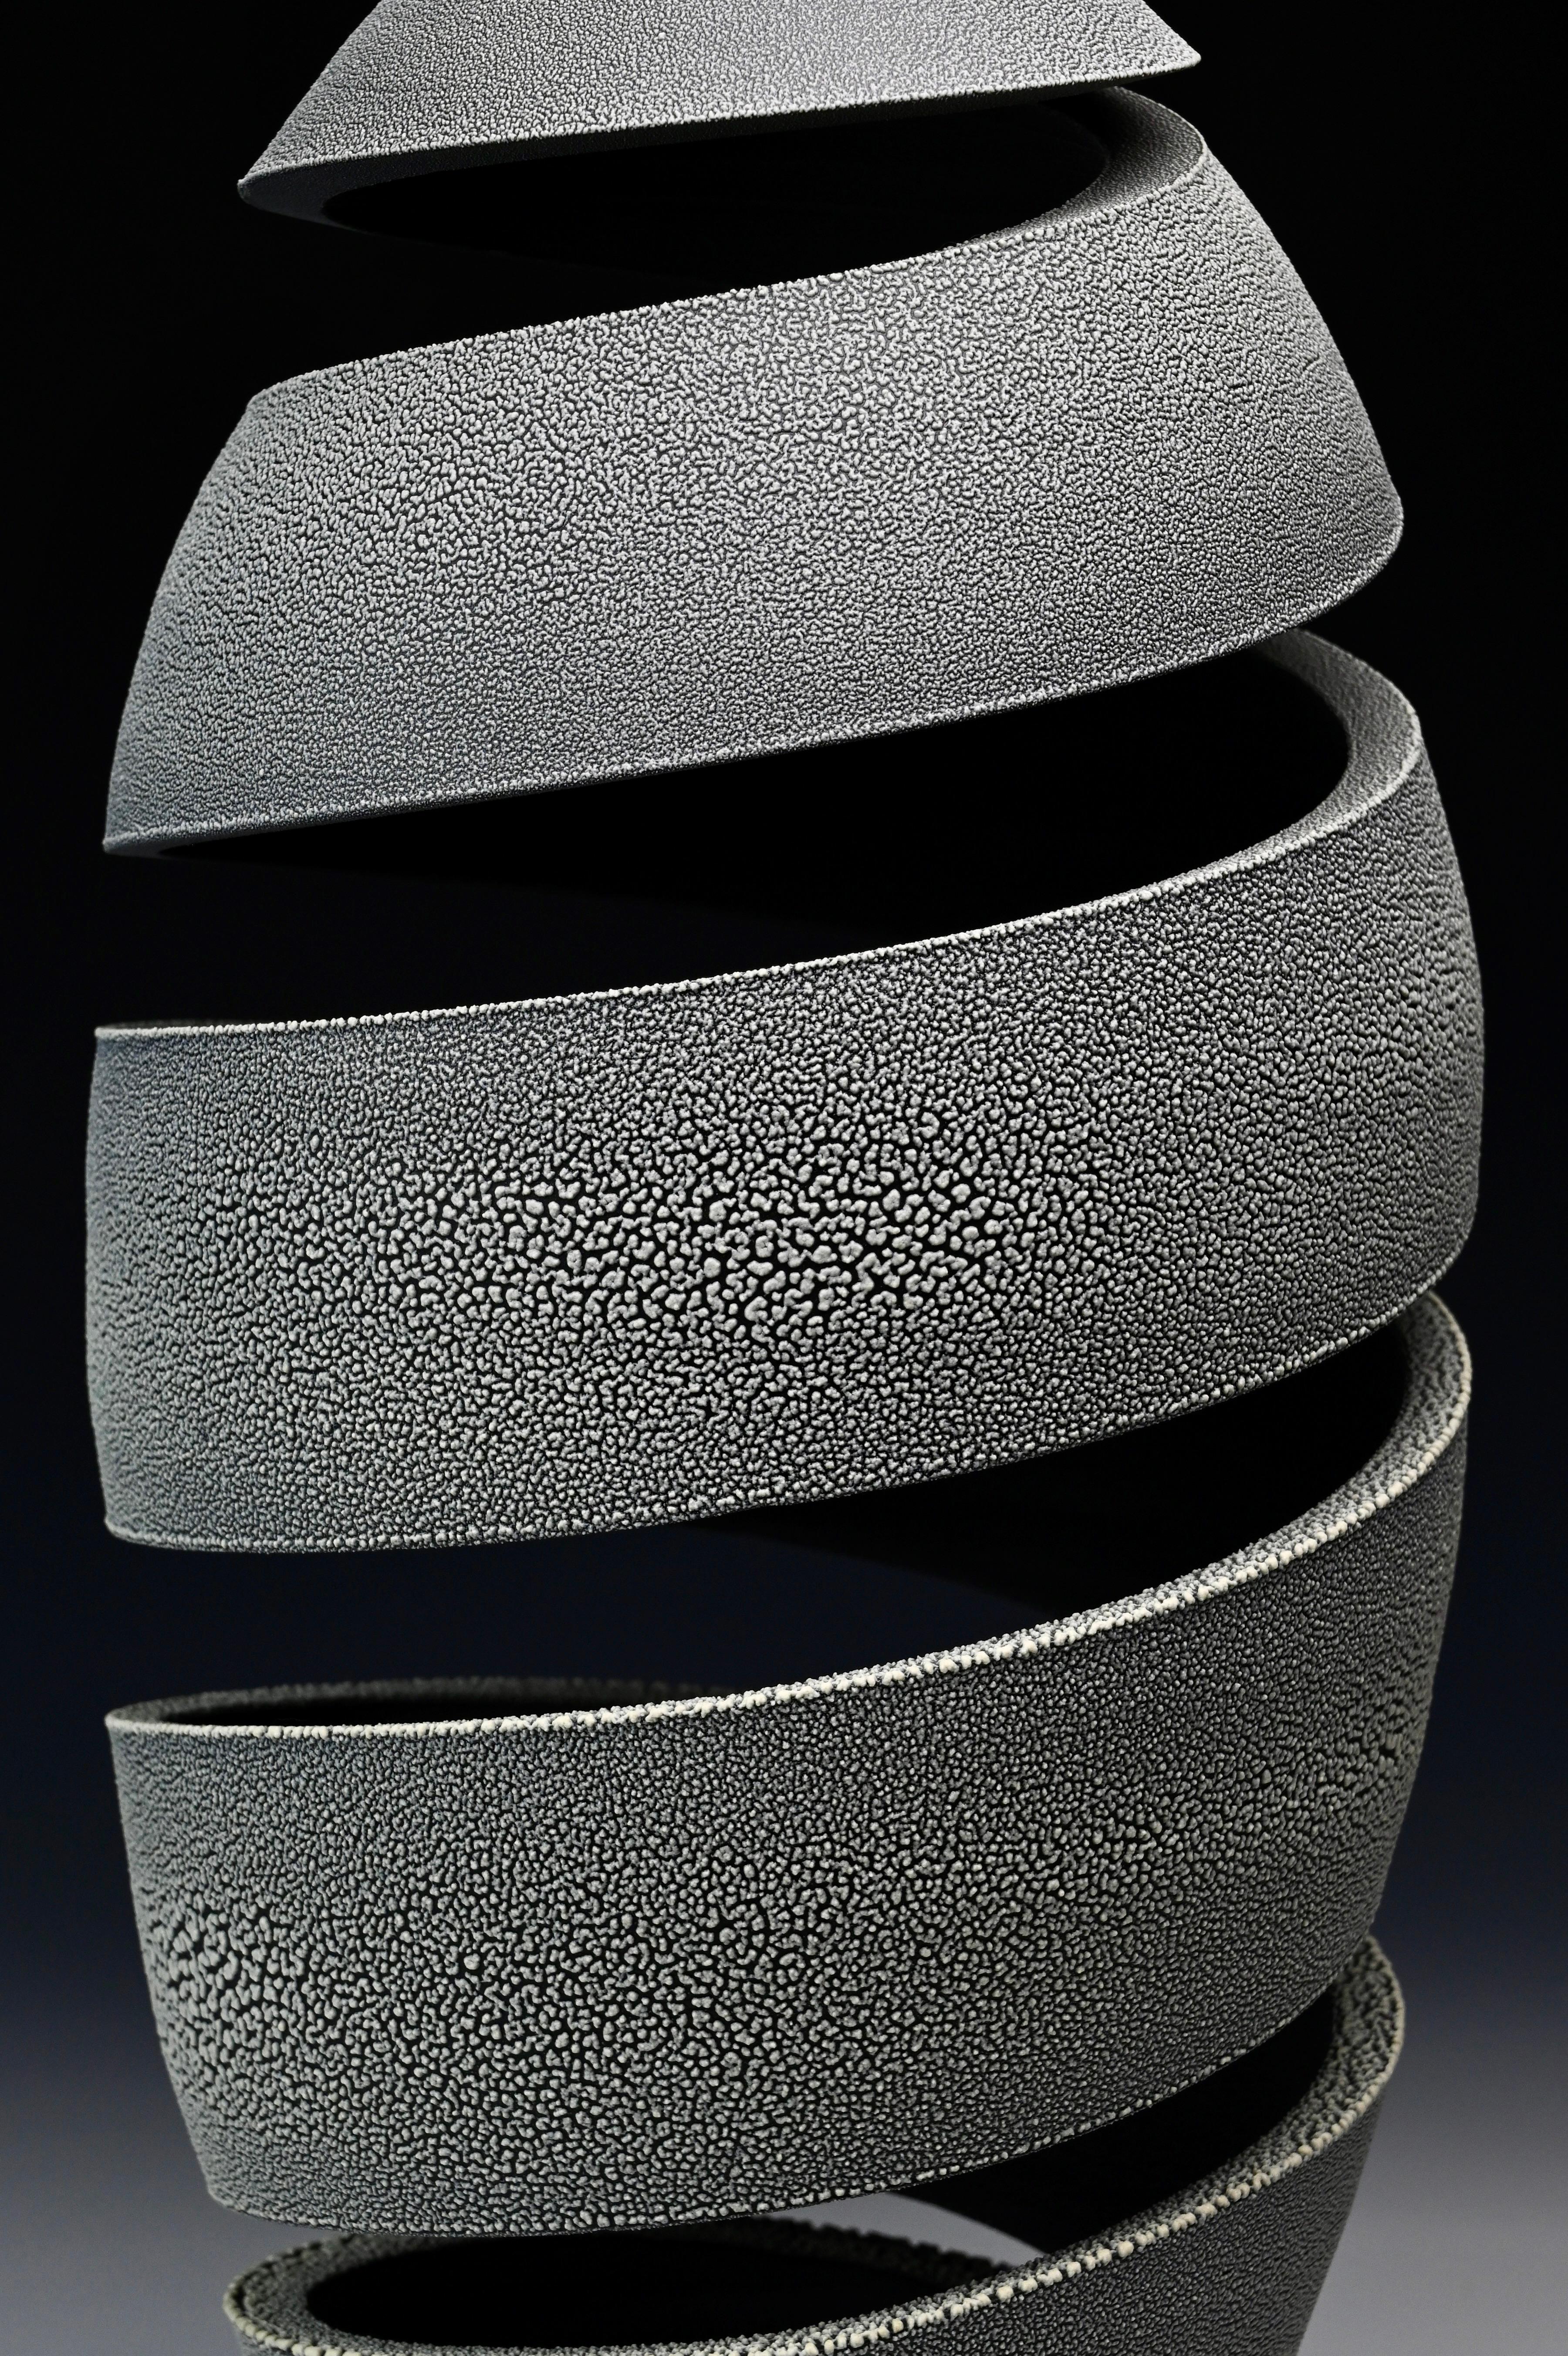 Modern Spatial Spiral: Crawl - Abstract spiral ceramic sculpture by Michael Boroniec For Sale